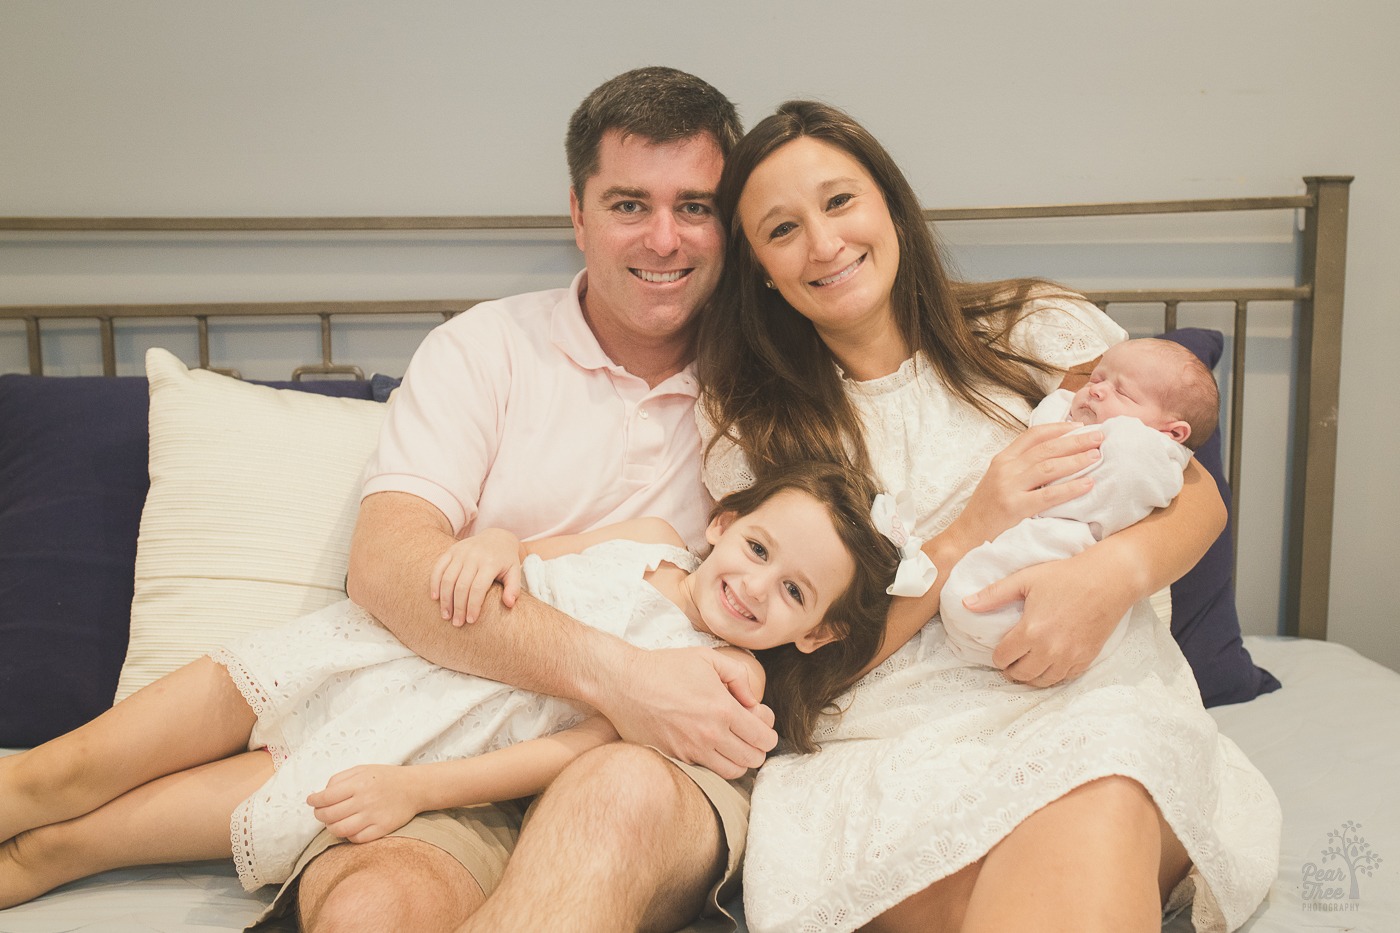 Cute family lounging on their master bed with newborn baby daughter